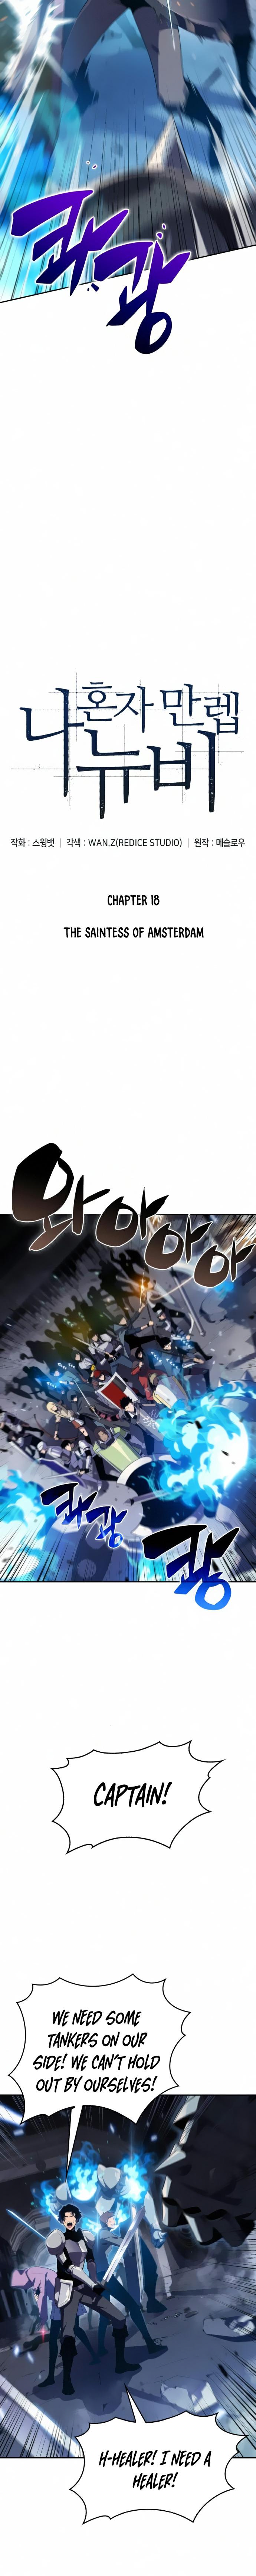 Solo Max-Level Newbie Chapter 18, Solo Max-Level Newbie 18, Read Solo Max-Level Newbie Chapter 18, Solo Max-Level Newbie Chapter 18 Manga, Solo Max-Level Newbie Chapter 18 english, Solo Max-Level Newbie Chapter 18 raw manga, Solo Max-Level Newbie Chapter 18 online, Solo Max-Level Newbie Chapter 18 high quality, Solo Max-Level Newbie 18 chapter, Solo Max-Level Newbie Chapter 18 manga scan